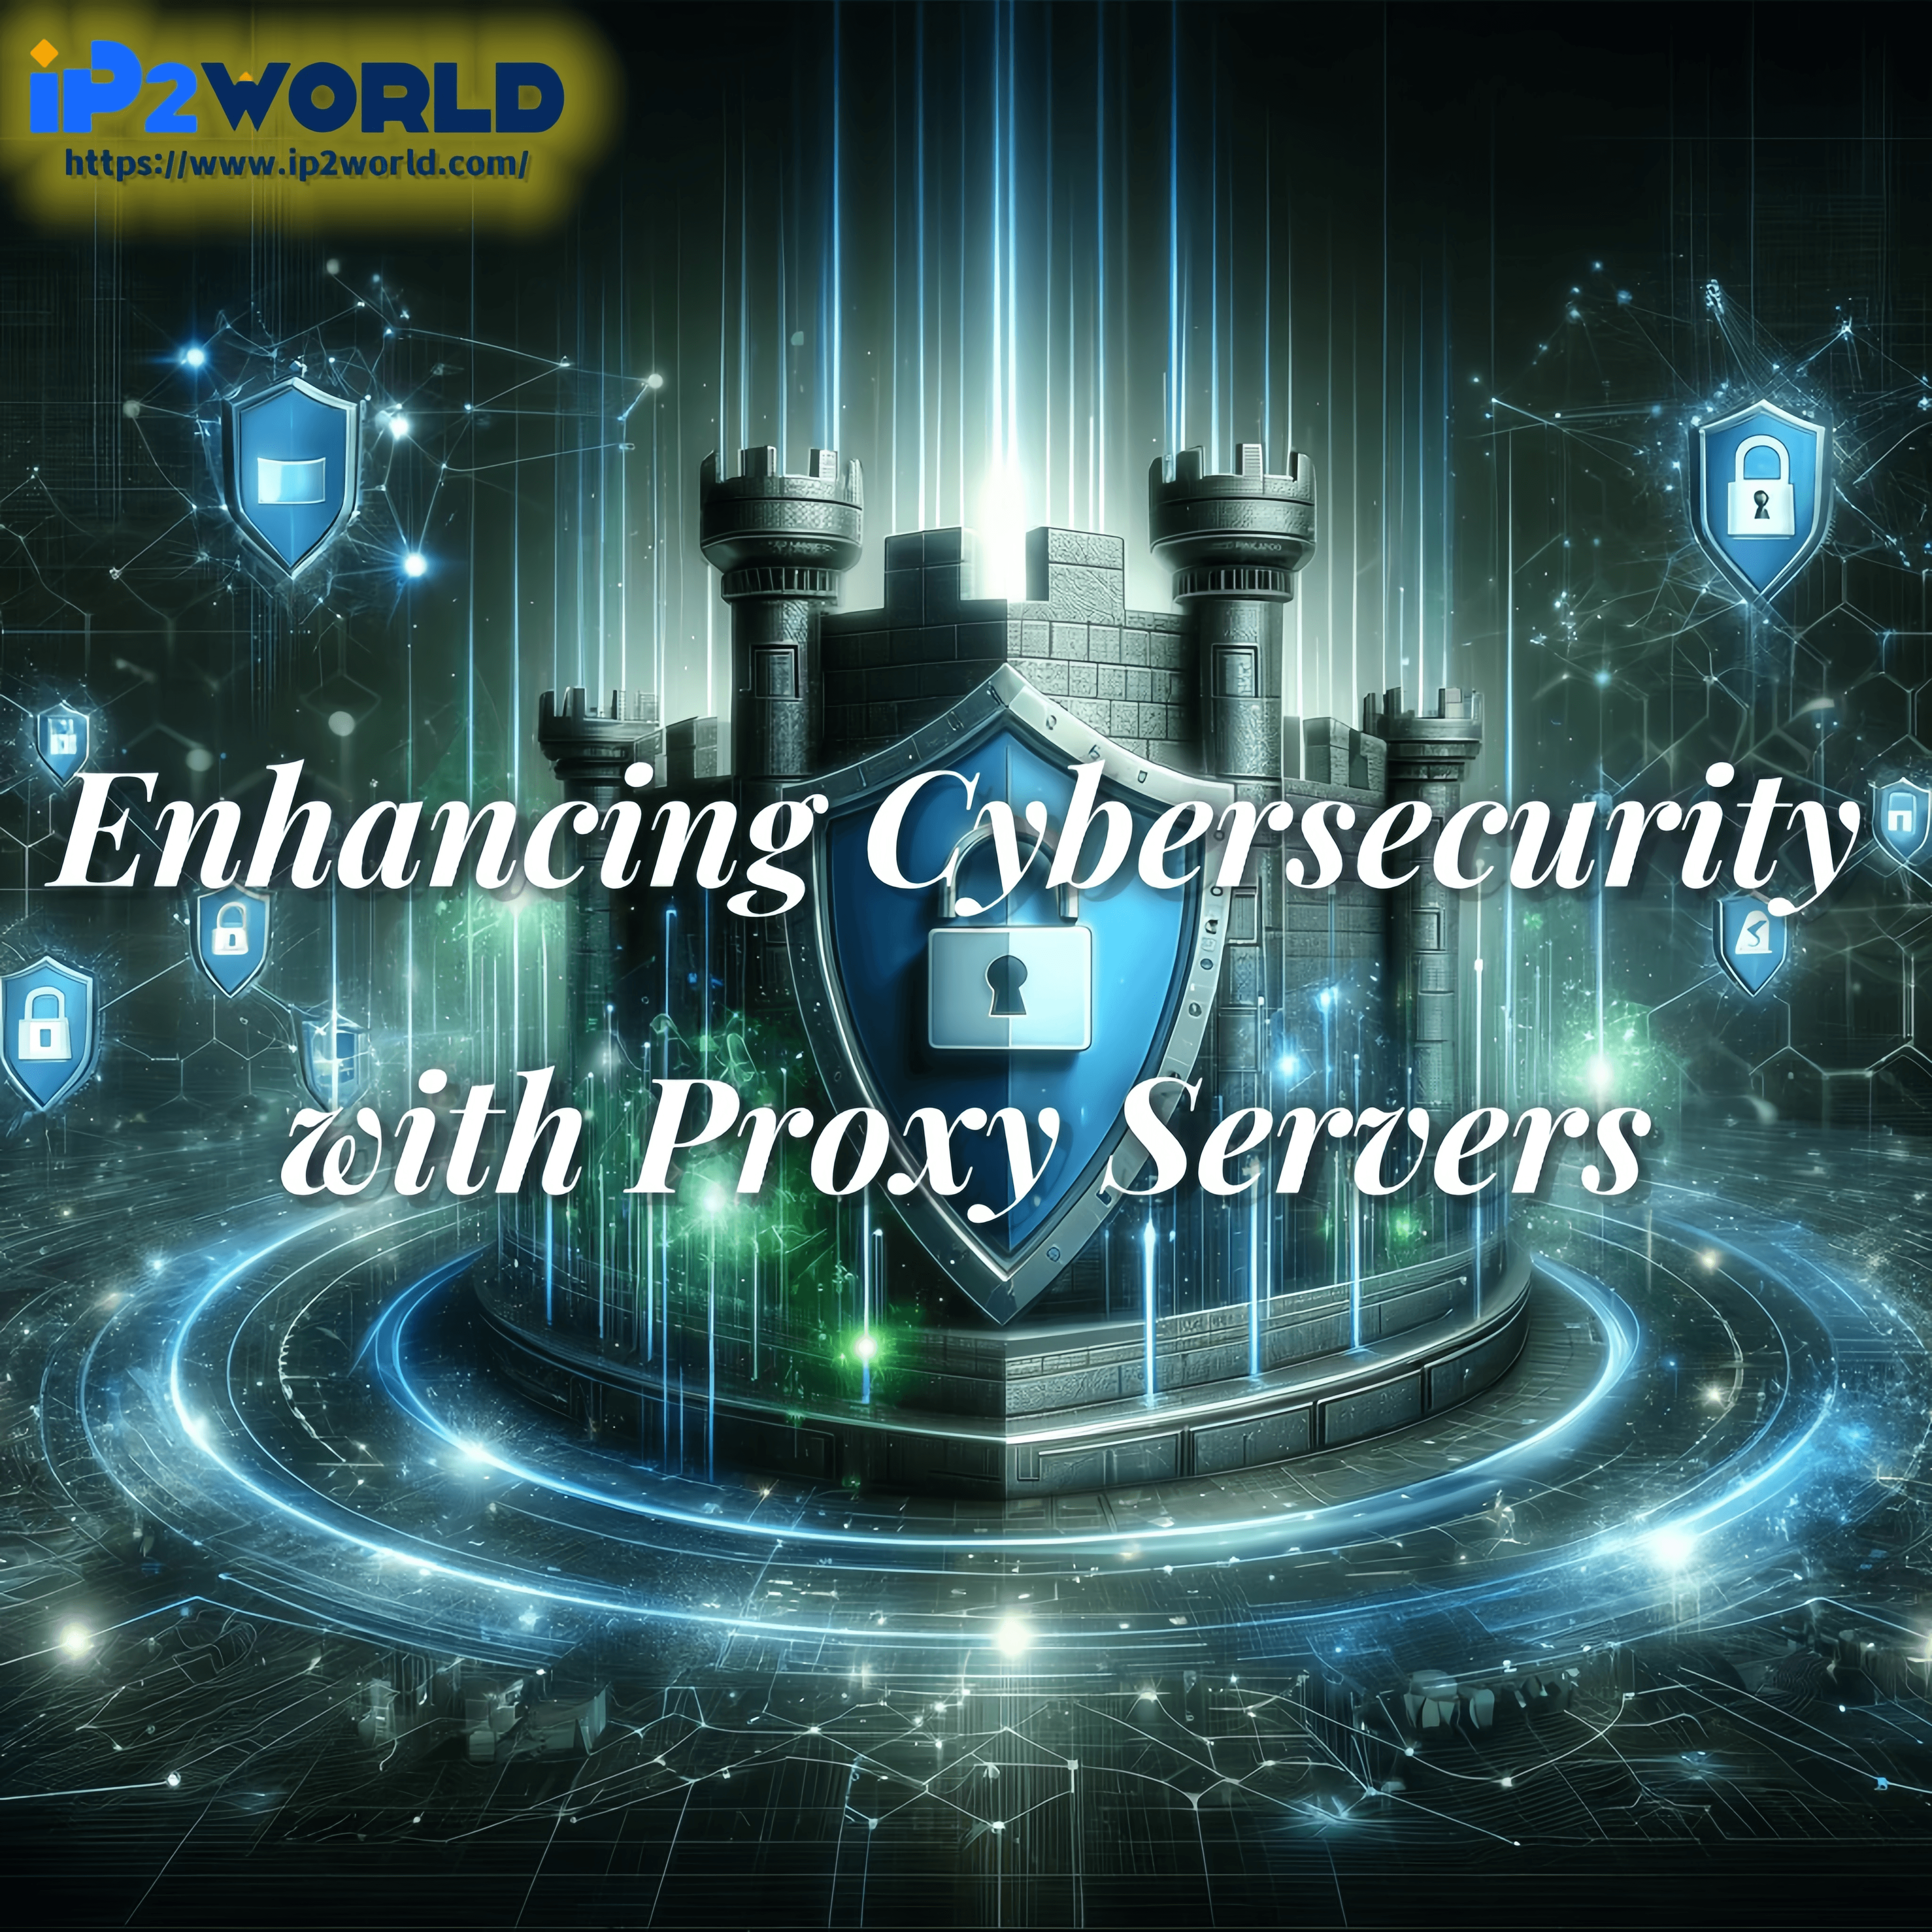 DALL·E 2023-11-22 15.44.43 - A dynamic digital illustration for 'Enhancing Cybersecurity with Proxy'. The image should depict a digital fortress or shield representing cybersecuri_副本_副本_副本.png